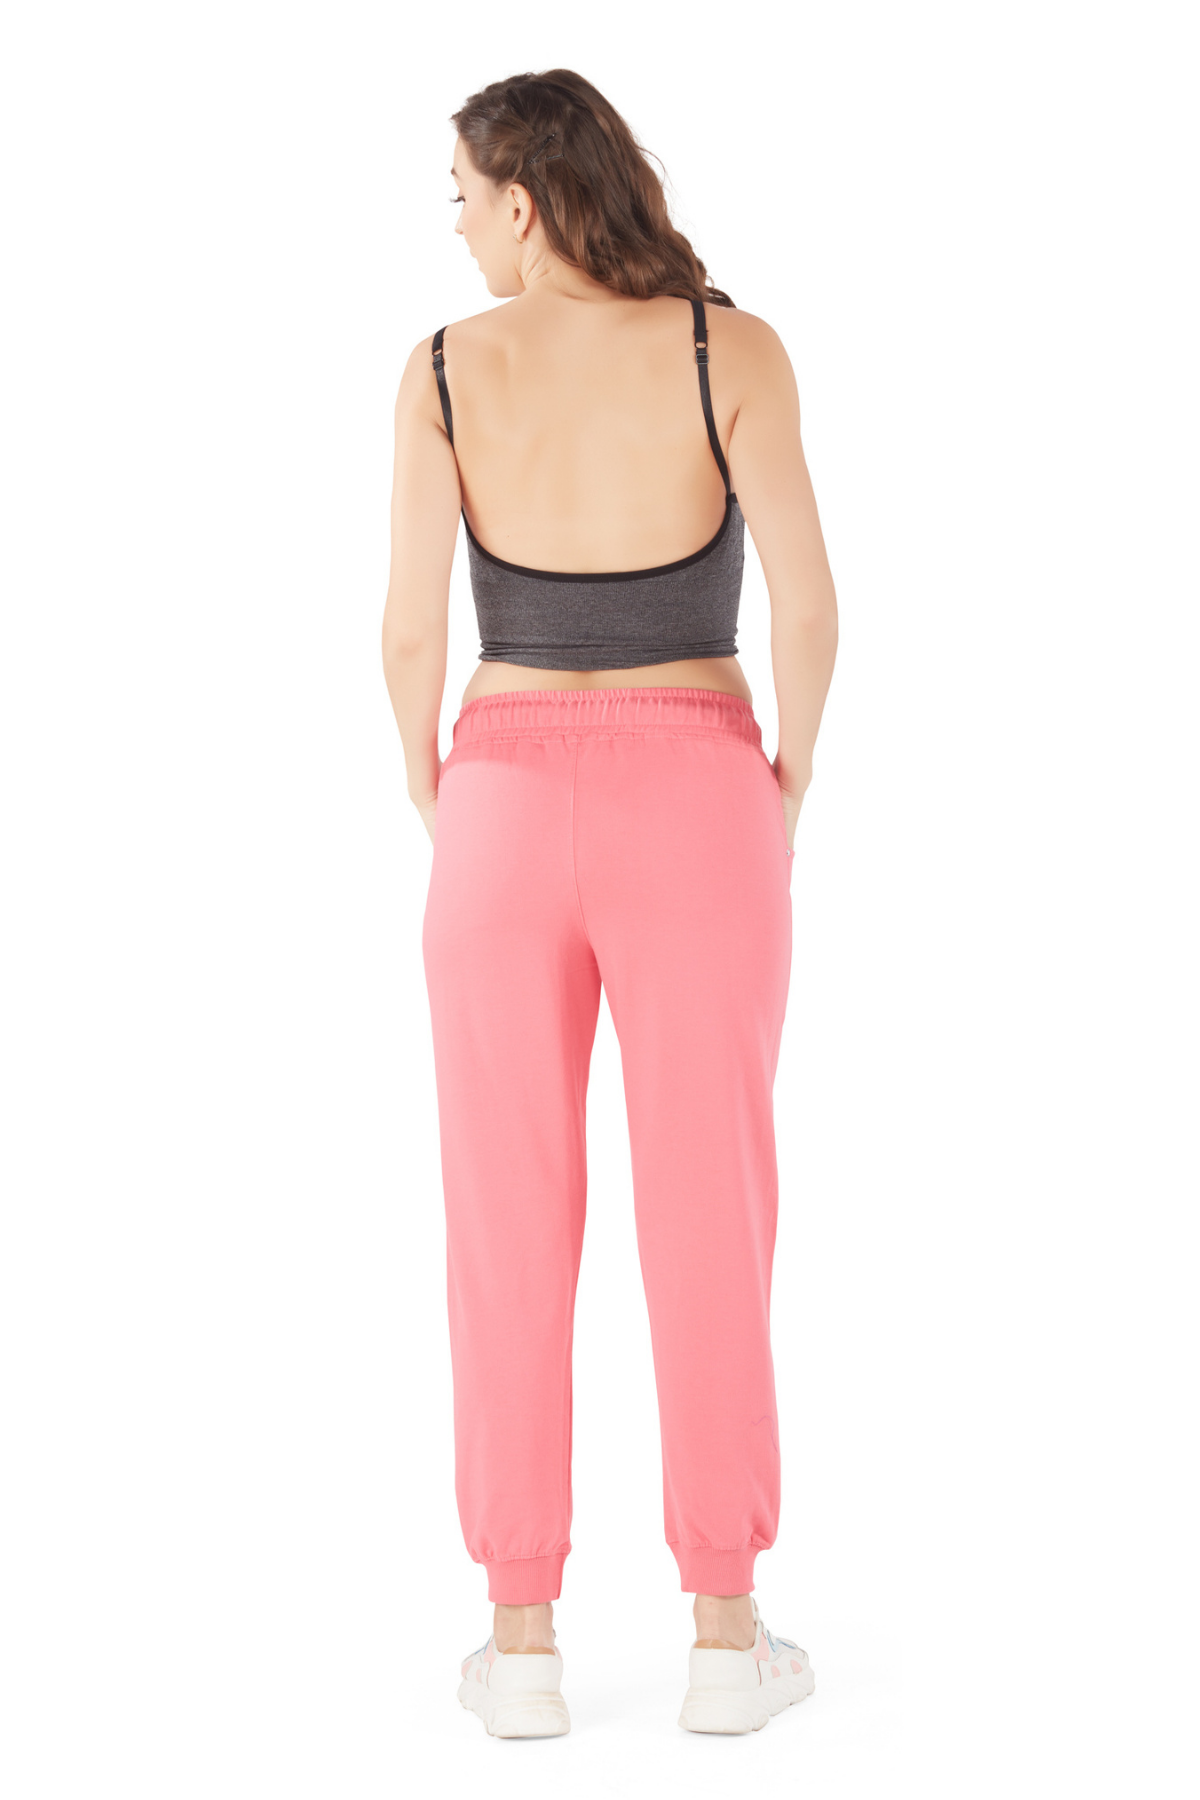 Comfortable Pink Regular Fit Cotton Joggers for women with pockets online in India